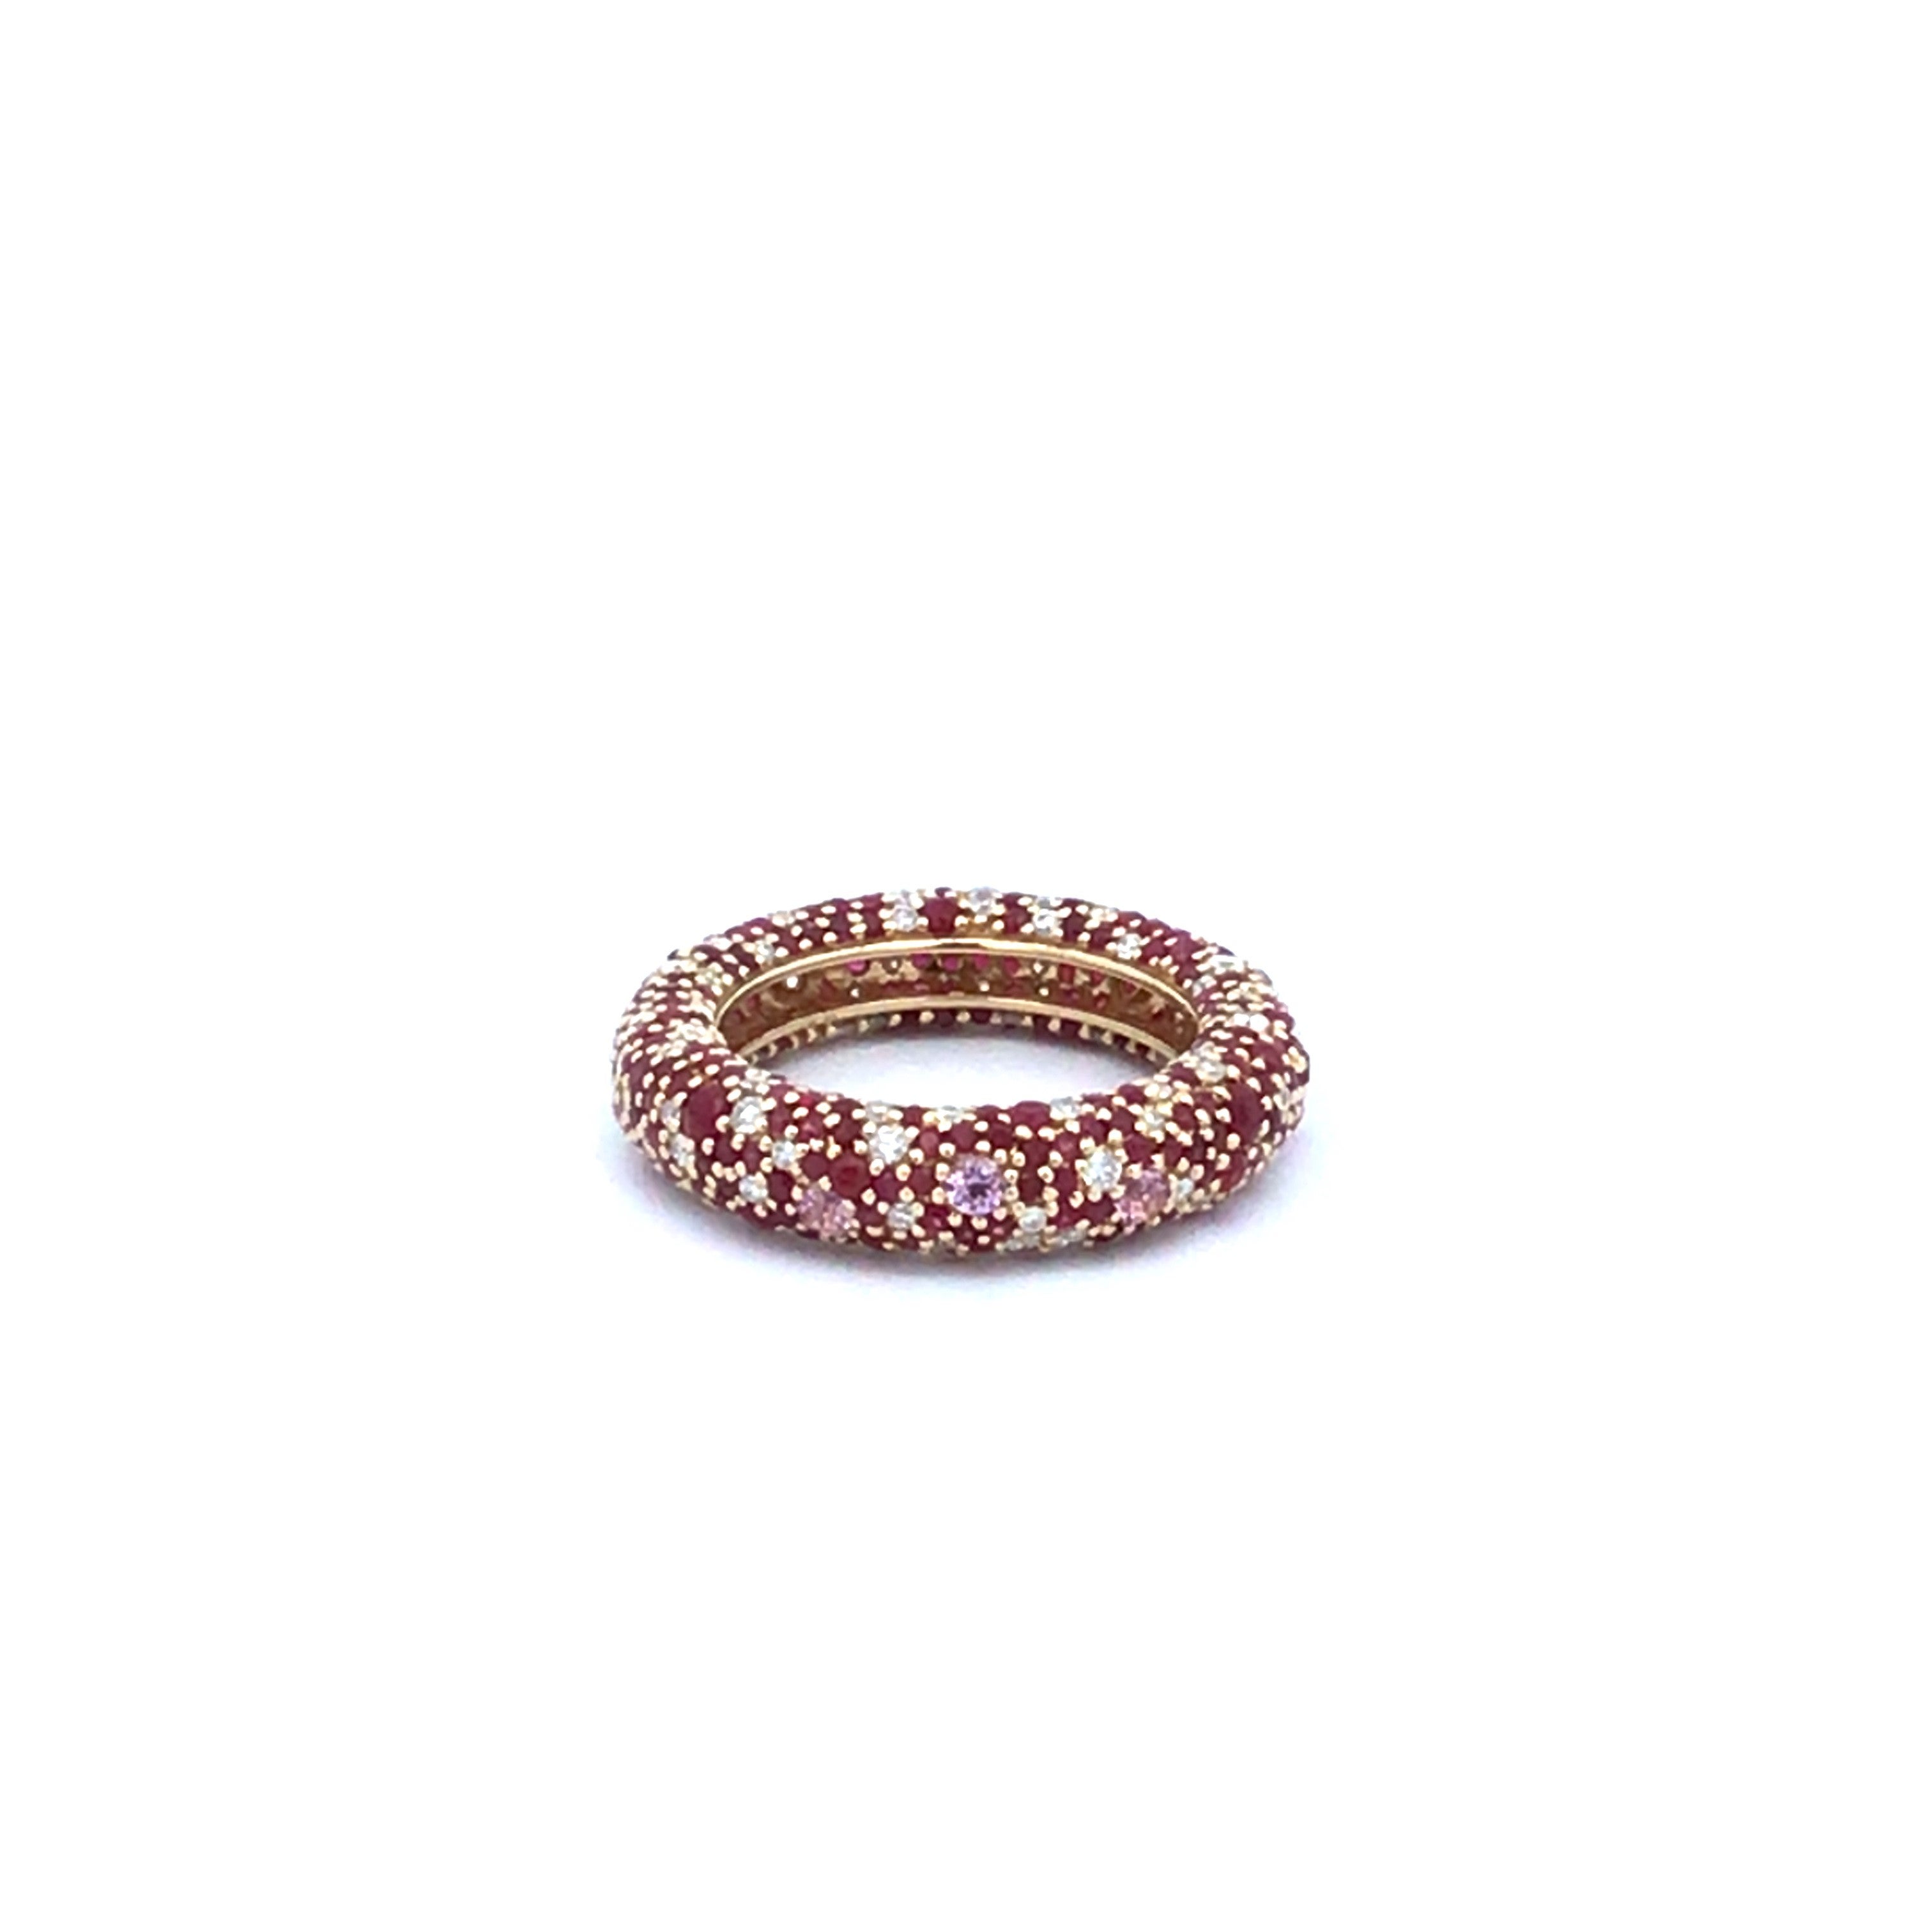 Adina Reyter Large Ruby + Pink Sapphire + Diamond Pavé Ring

This ring effortlessly adds a touch of sophistication to any ensemble! The 14k yellow gold dome band ring showcases a unique blend of hand-set pavé rubies, pink sapphires, and diamonds all